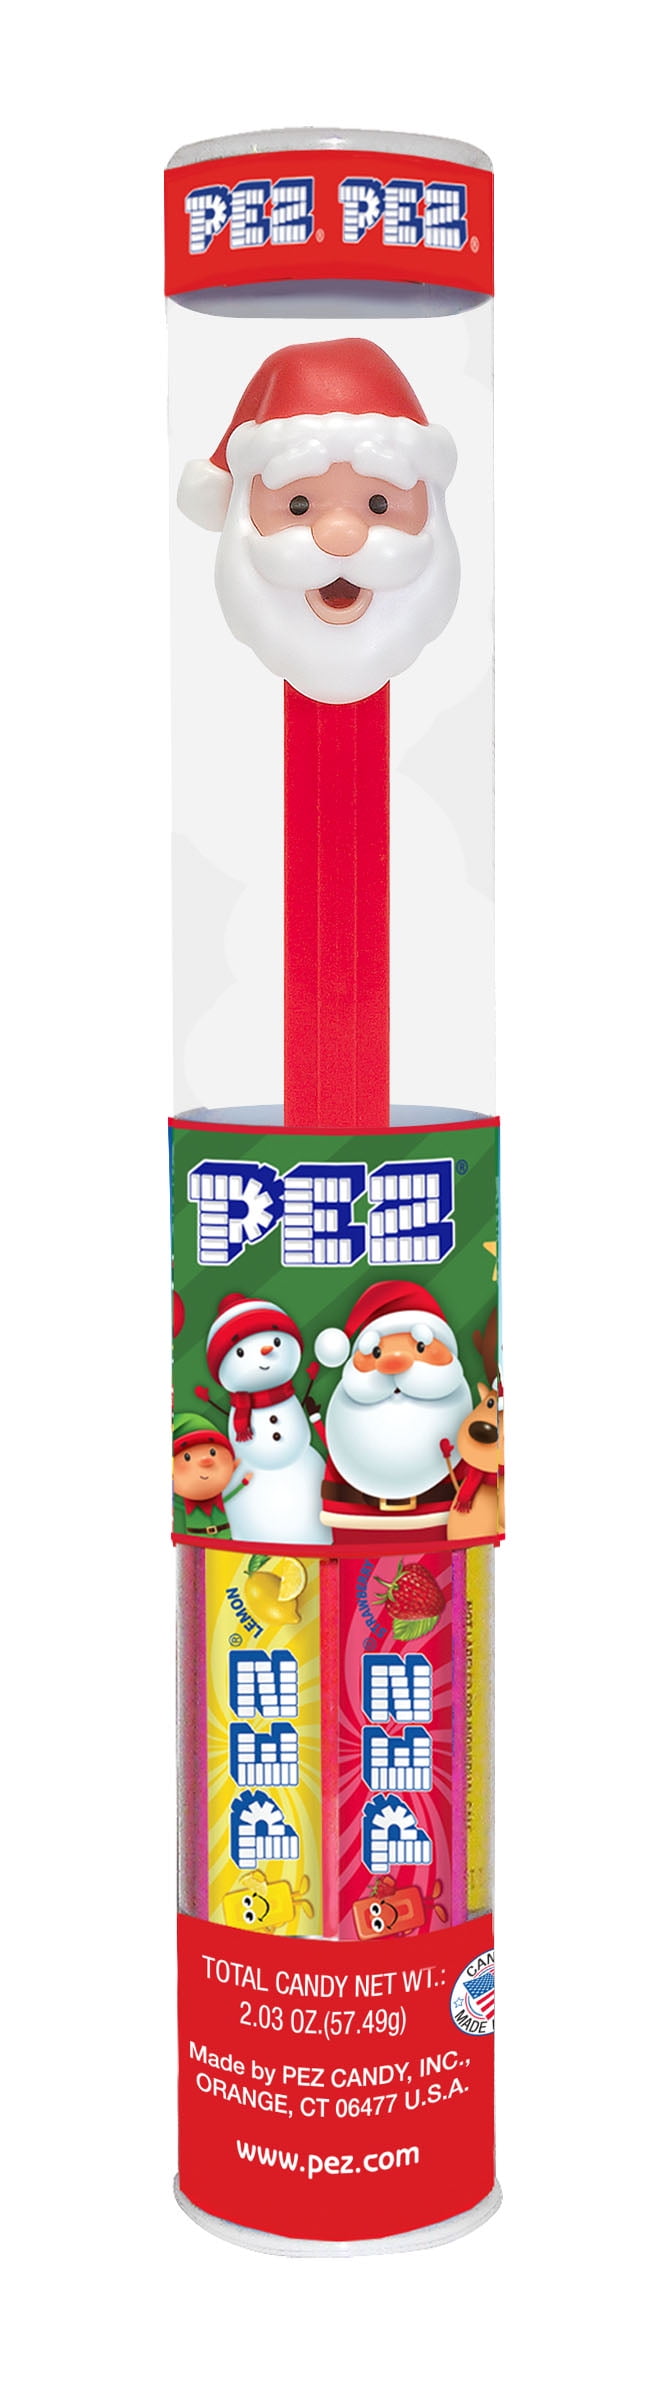 PEZ Candy, Christmas Candy Dispenser Tube, 7 Refills, 1 Count, 2.03oz